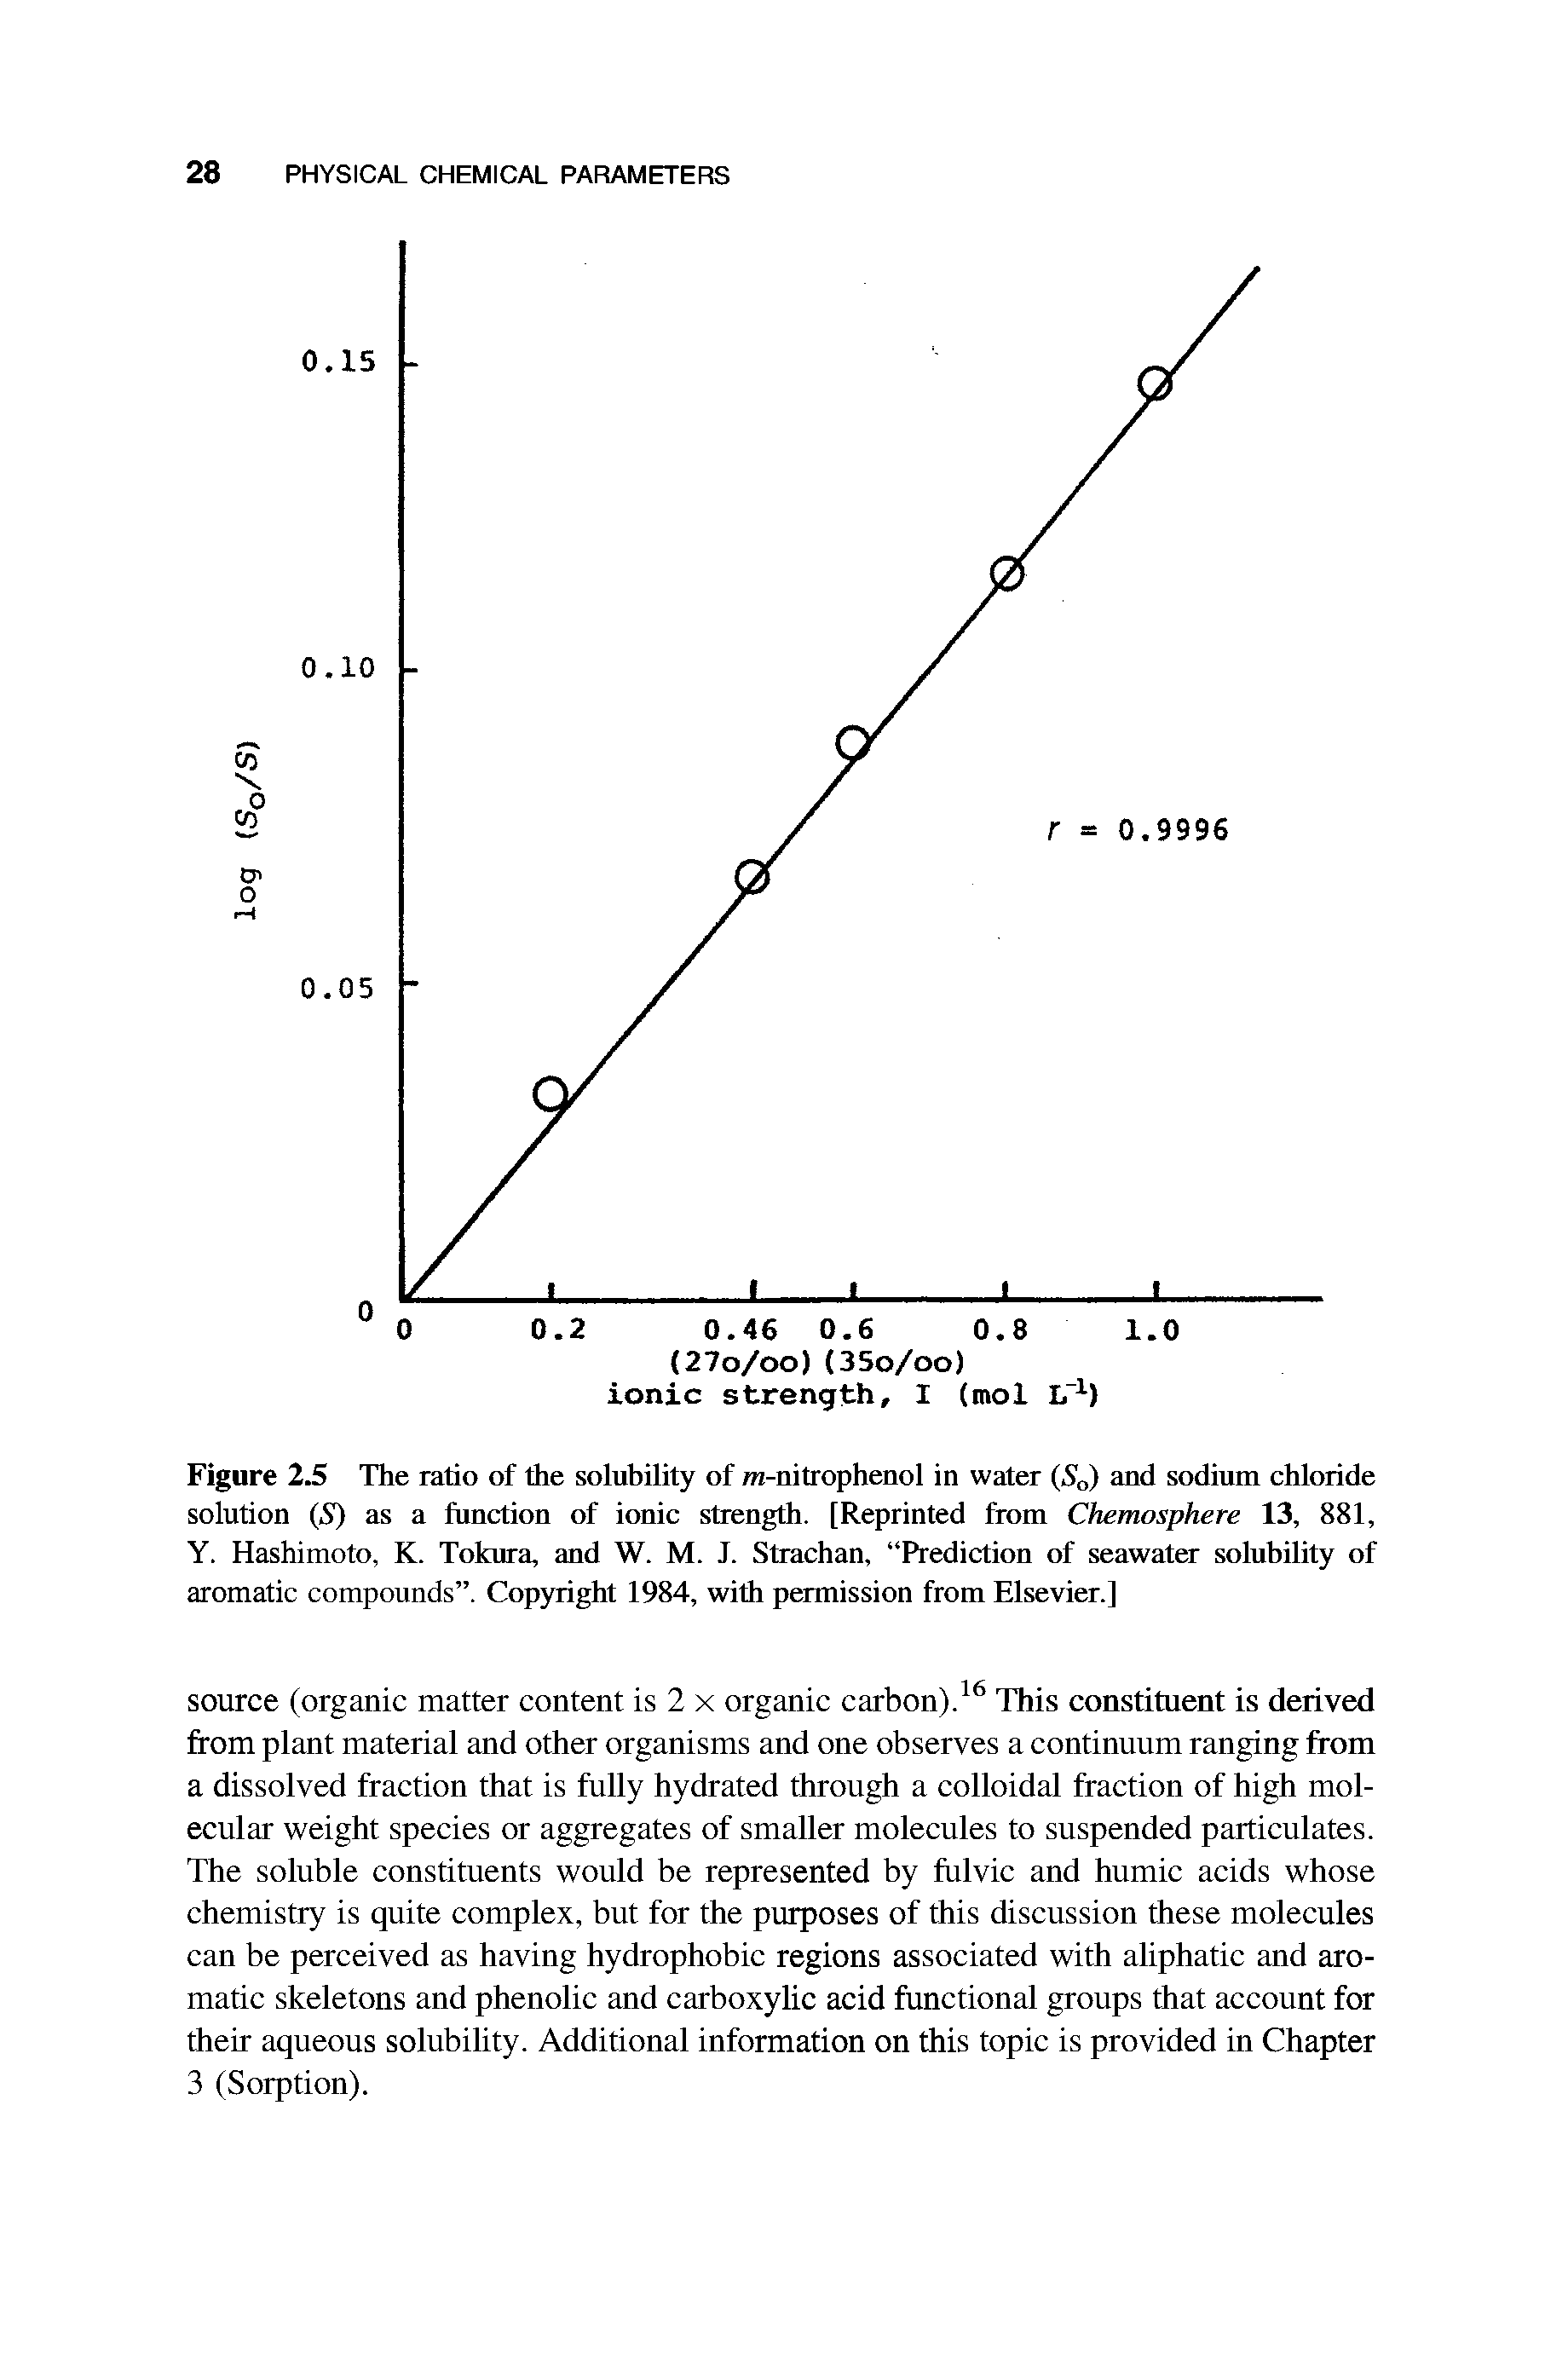 Figure 2.5 The ratio of the solubility of m-nitrophenol in water (5o) and sodium chloride solution (S) as a function of ionic strength. [Reprinted from Chemosphere 13, 881, Y. Hashimoto, K. Tokura, and W. M. J. Strachan, Prediction of seawater solubility of aromatic compounds . Copyright 1984, with permission from Elsevier.]...